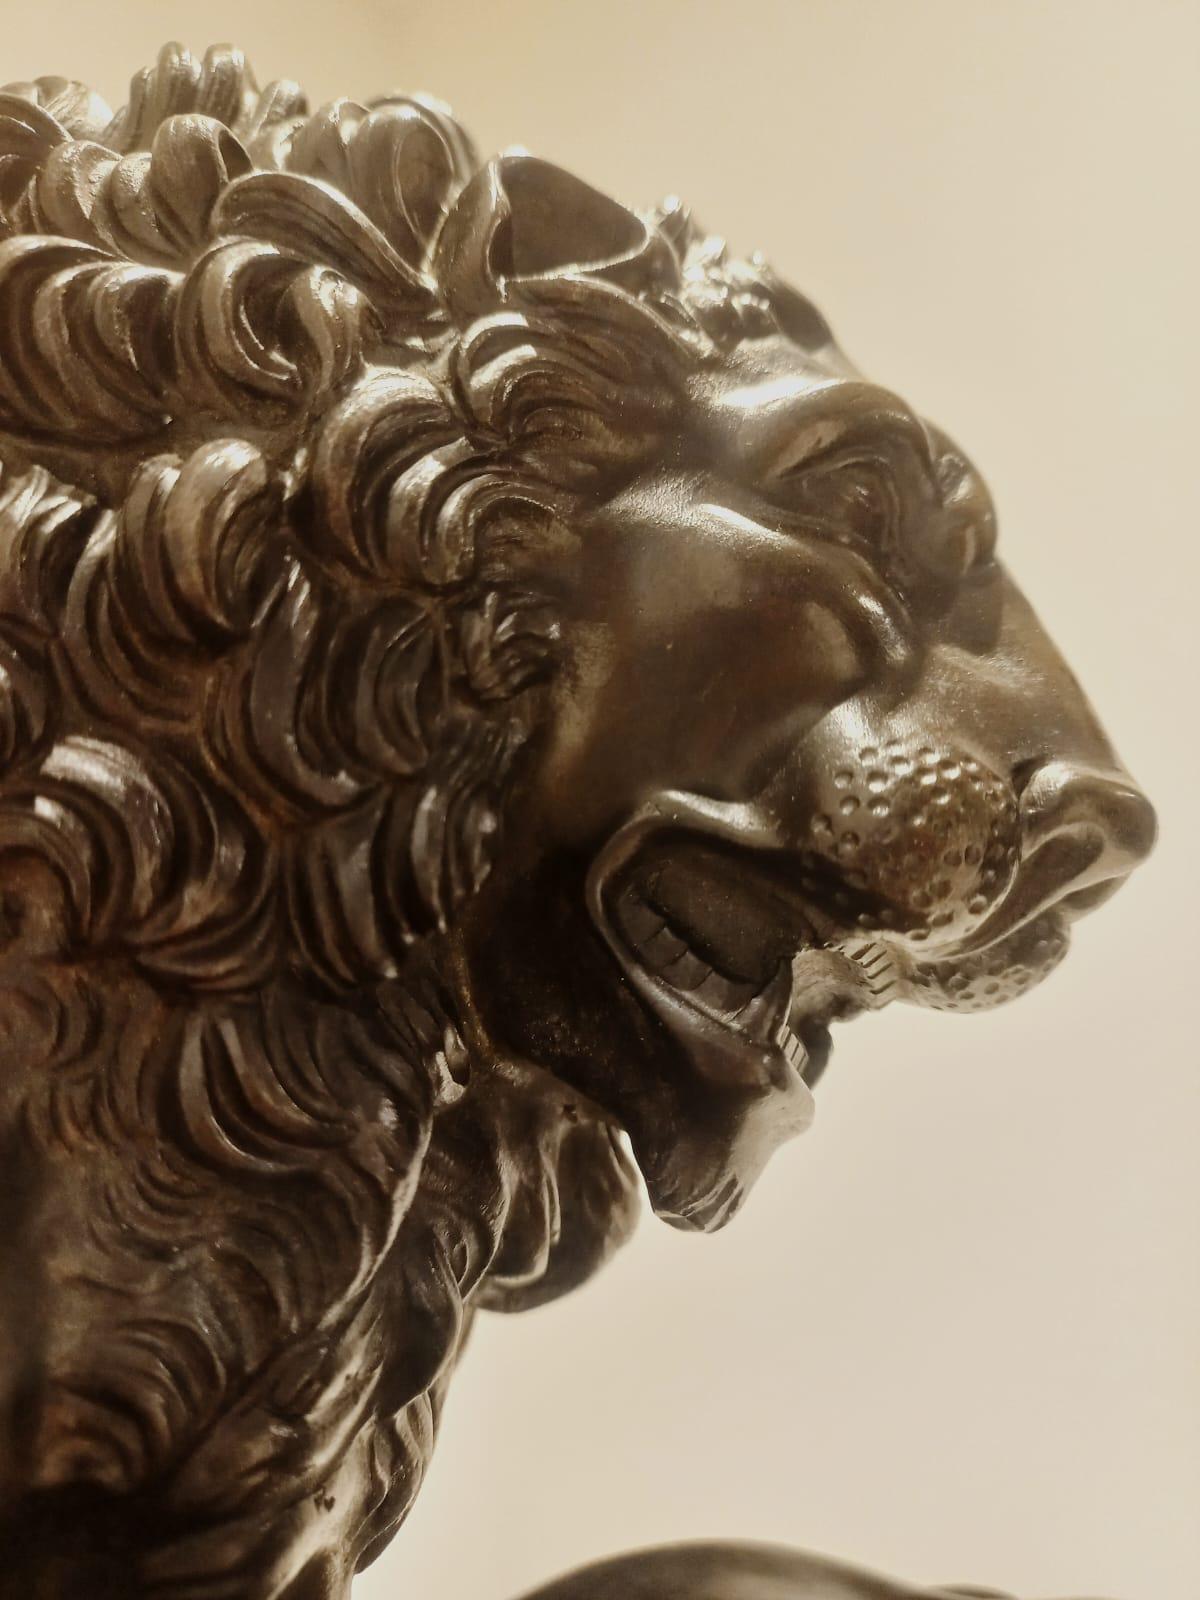 Lion with paw on cannonball made of agate jasper, chiseled and burnished bronze, 19th century, measures 33x11 cm, height 20 cm; ebonized wood base measures 36x15 cm, height 10 cm.
The sculpture depicts the marble lion found in Loggia dei Lanzi in